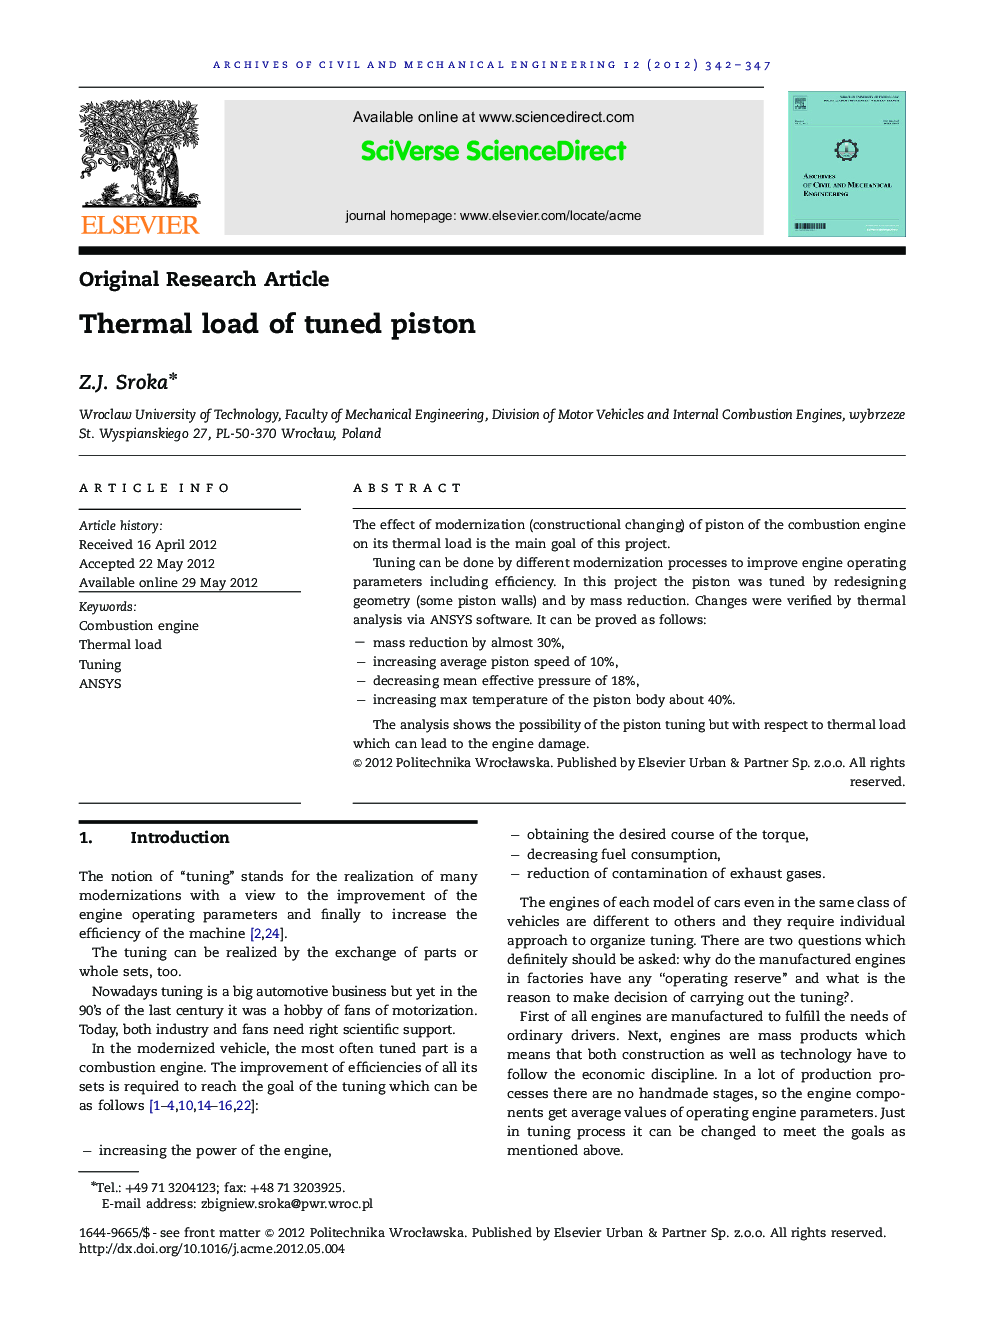 Thermal load of tuned piston